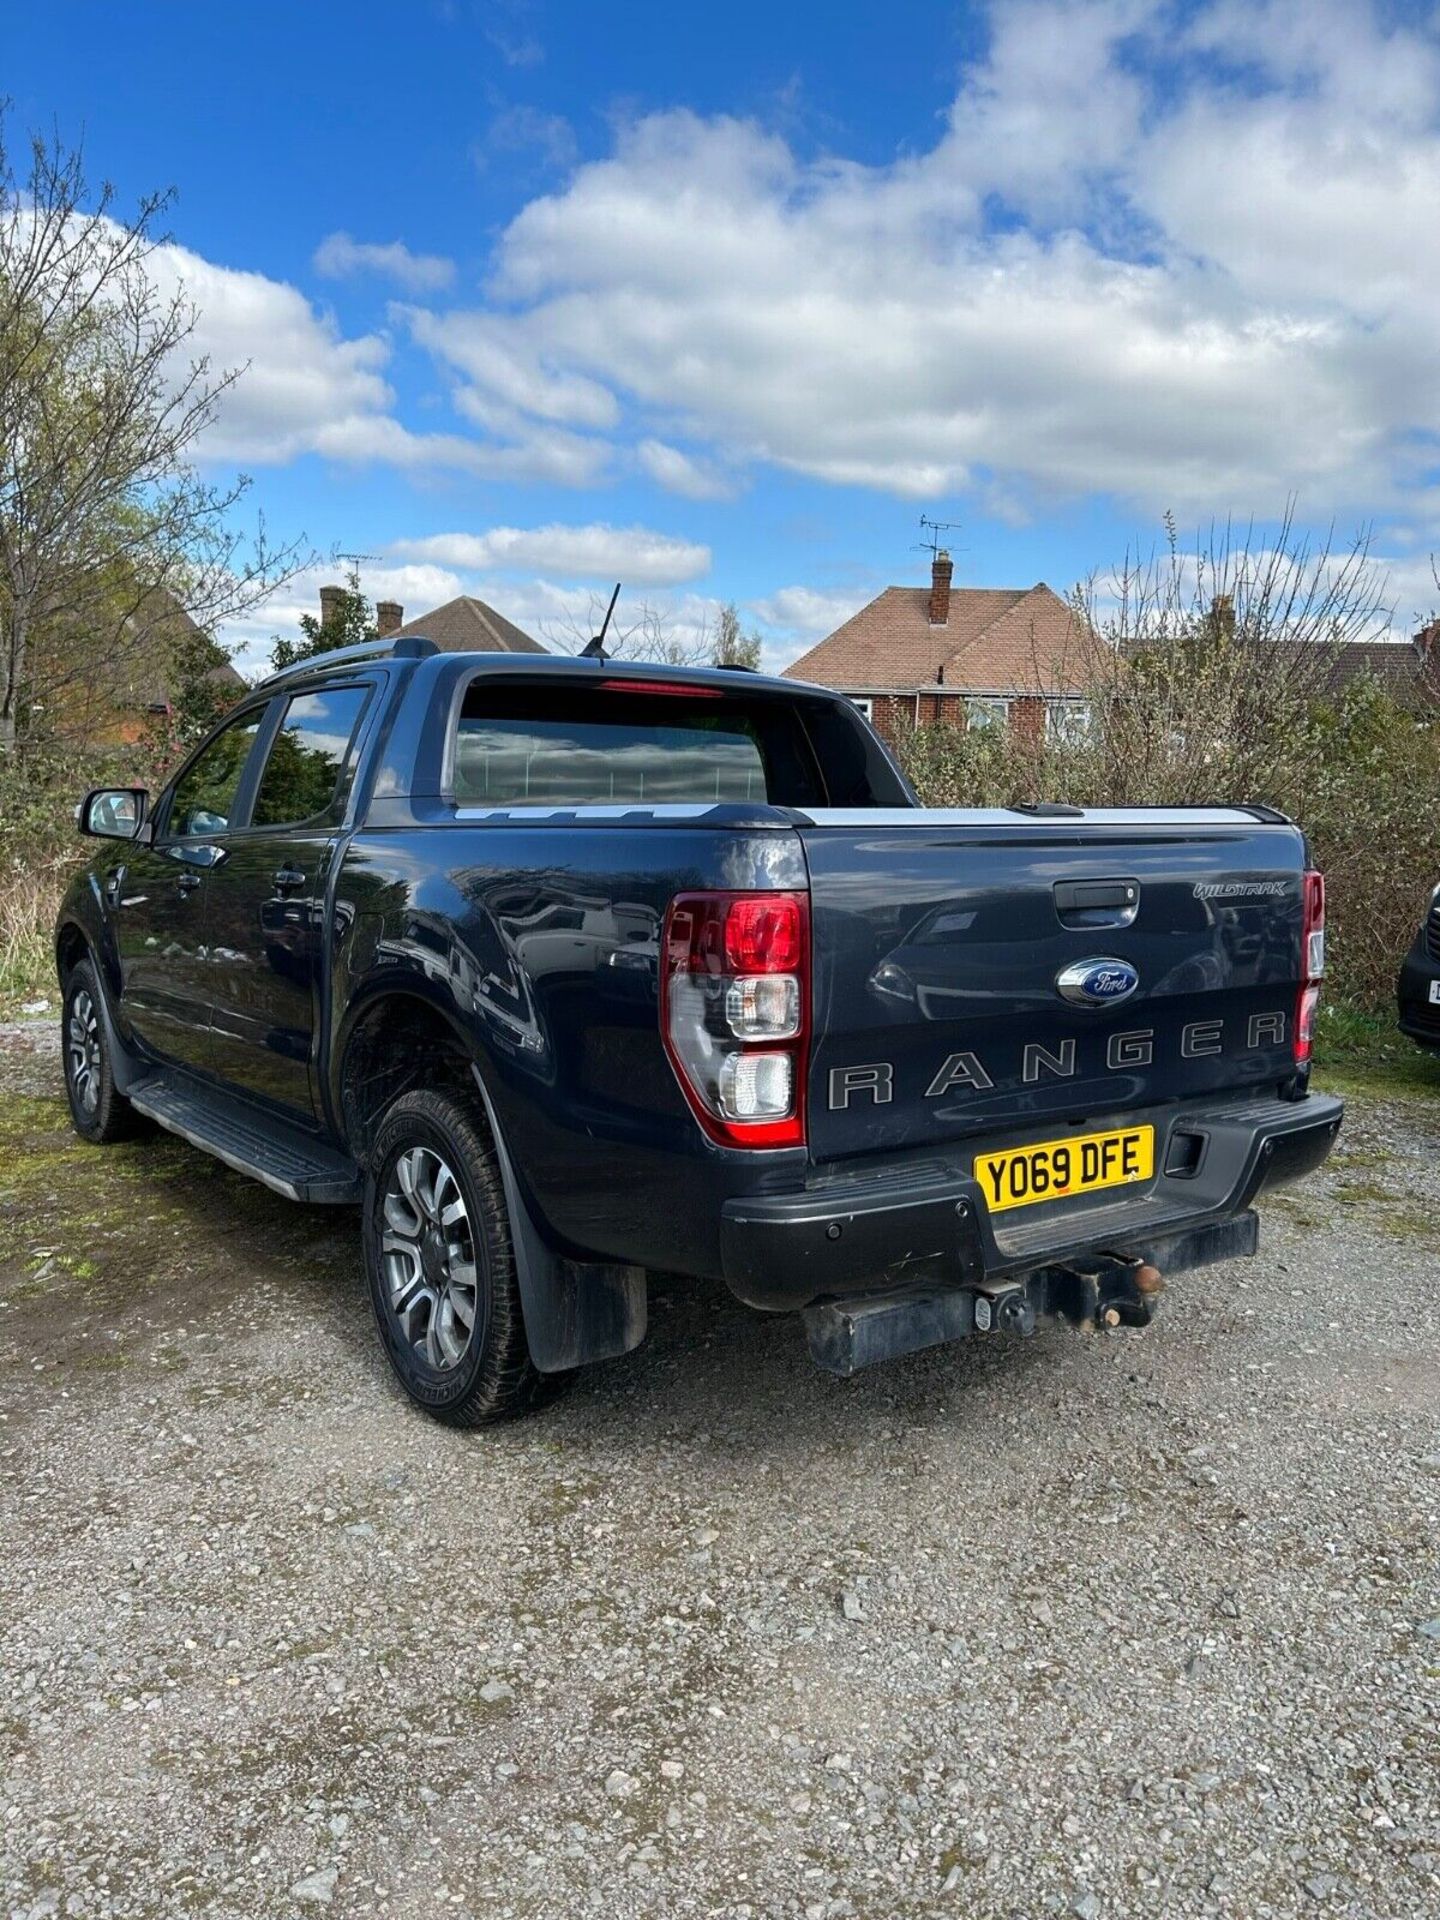 2020 FORD RANGER WILDTRAK 3.2 AUTOMATIC DOUBLE CAB PICKUP TRUCK 4WD EURO 6 *RESERVE JUST REDUCED*. - Image 10 of 14